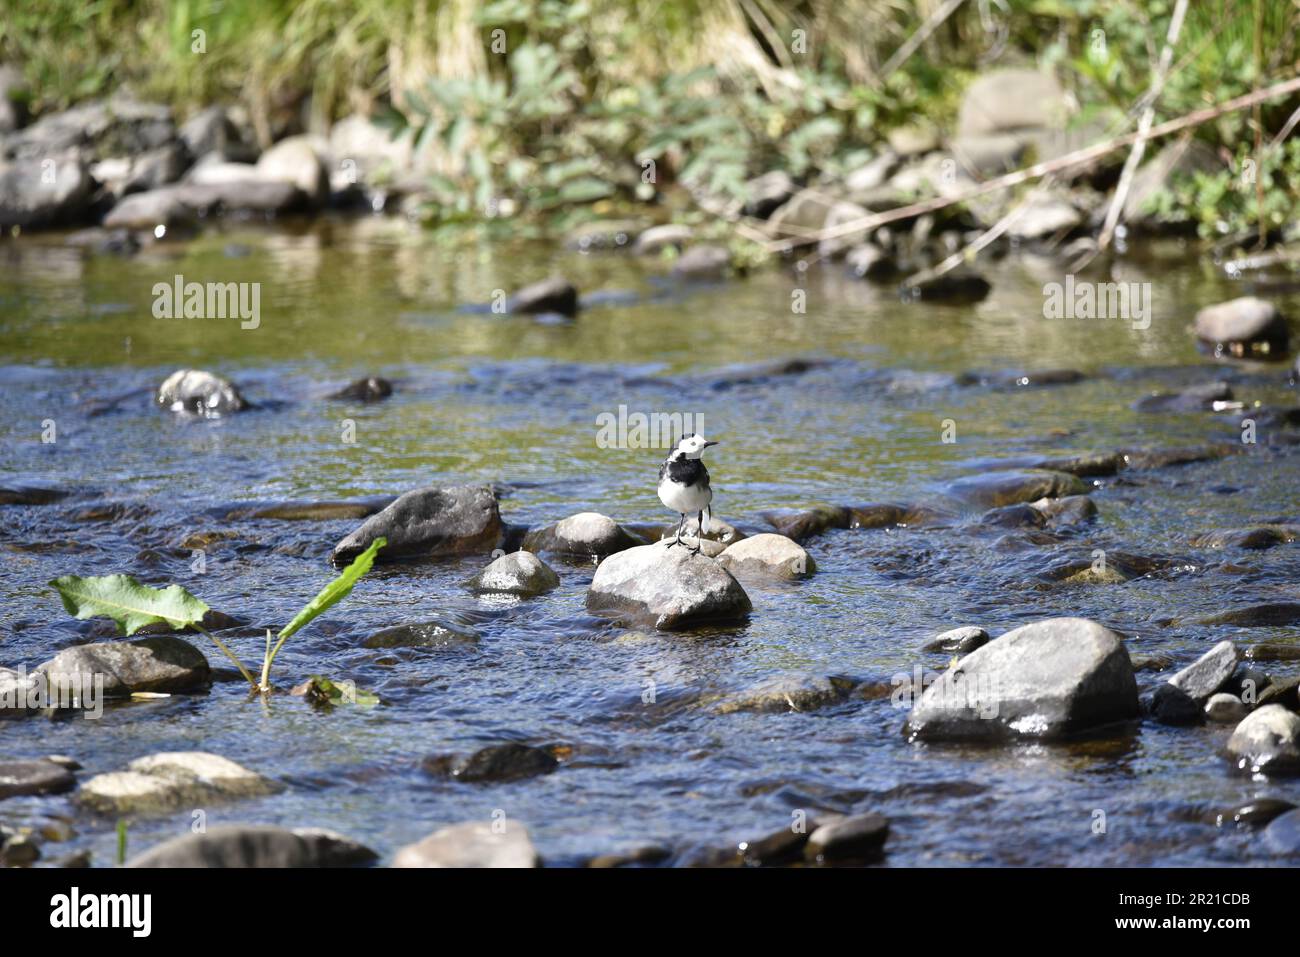 Female Pied Wagtail (Motacilla alba) Perched on a Stone in a River, Facing Camera Middle of Image, Head Turned to Right, in Mid-Wales, UK in May Stock Photo